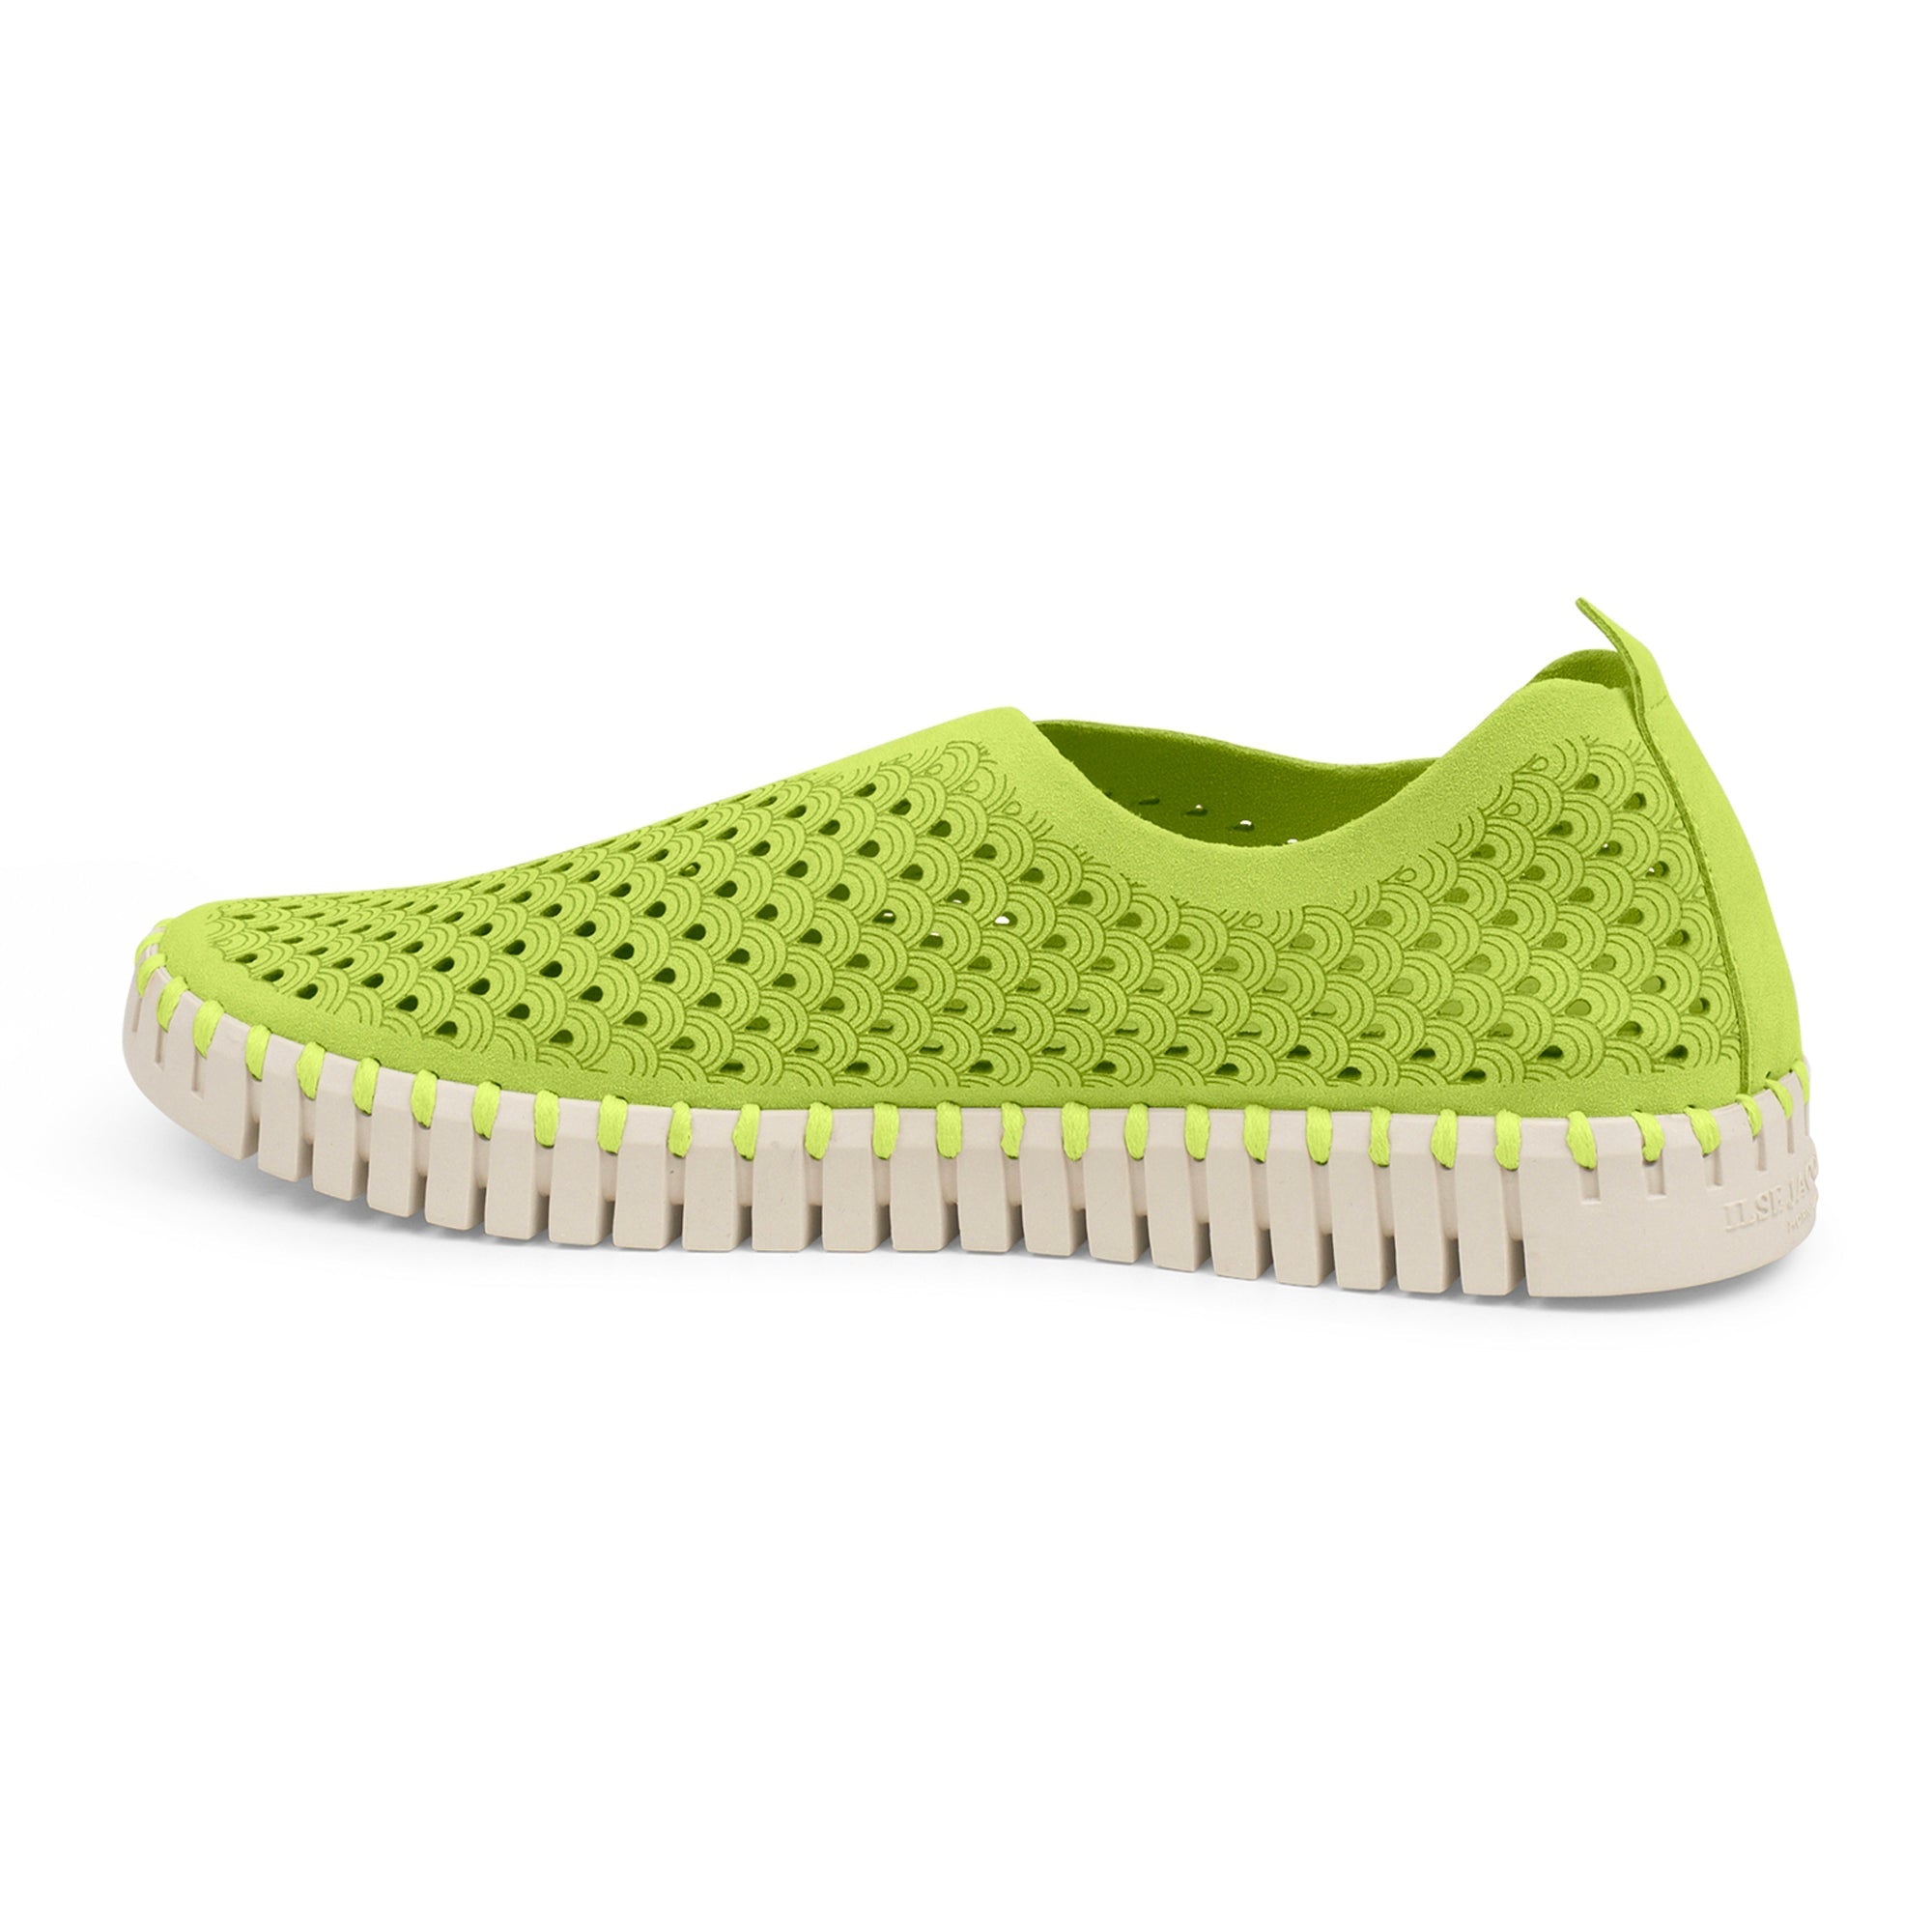 Loafers TULIP3275 - 804 Lime | Lime